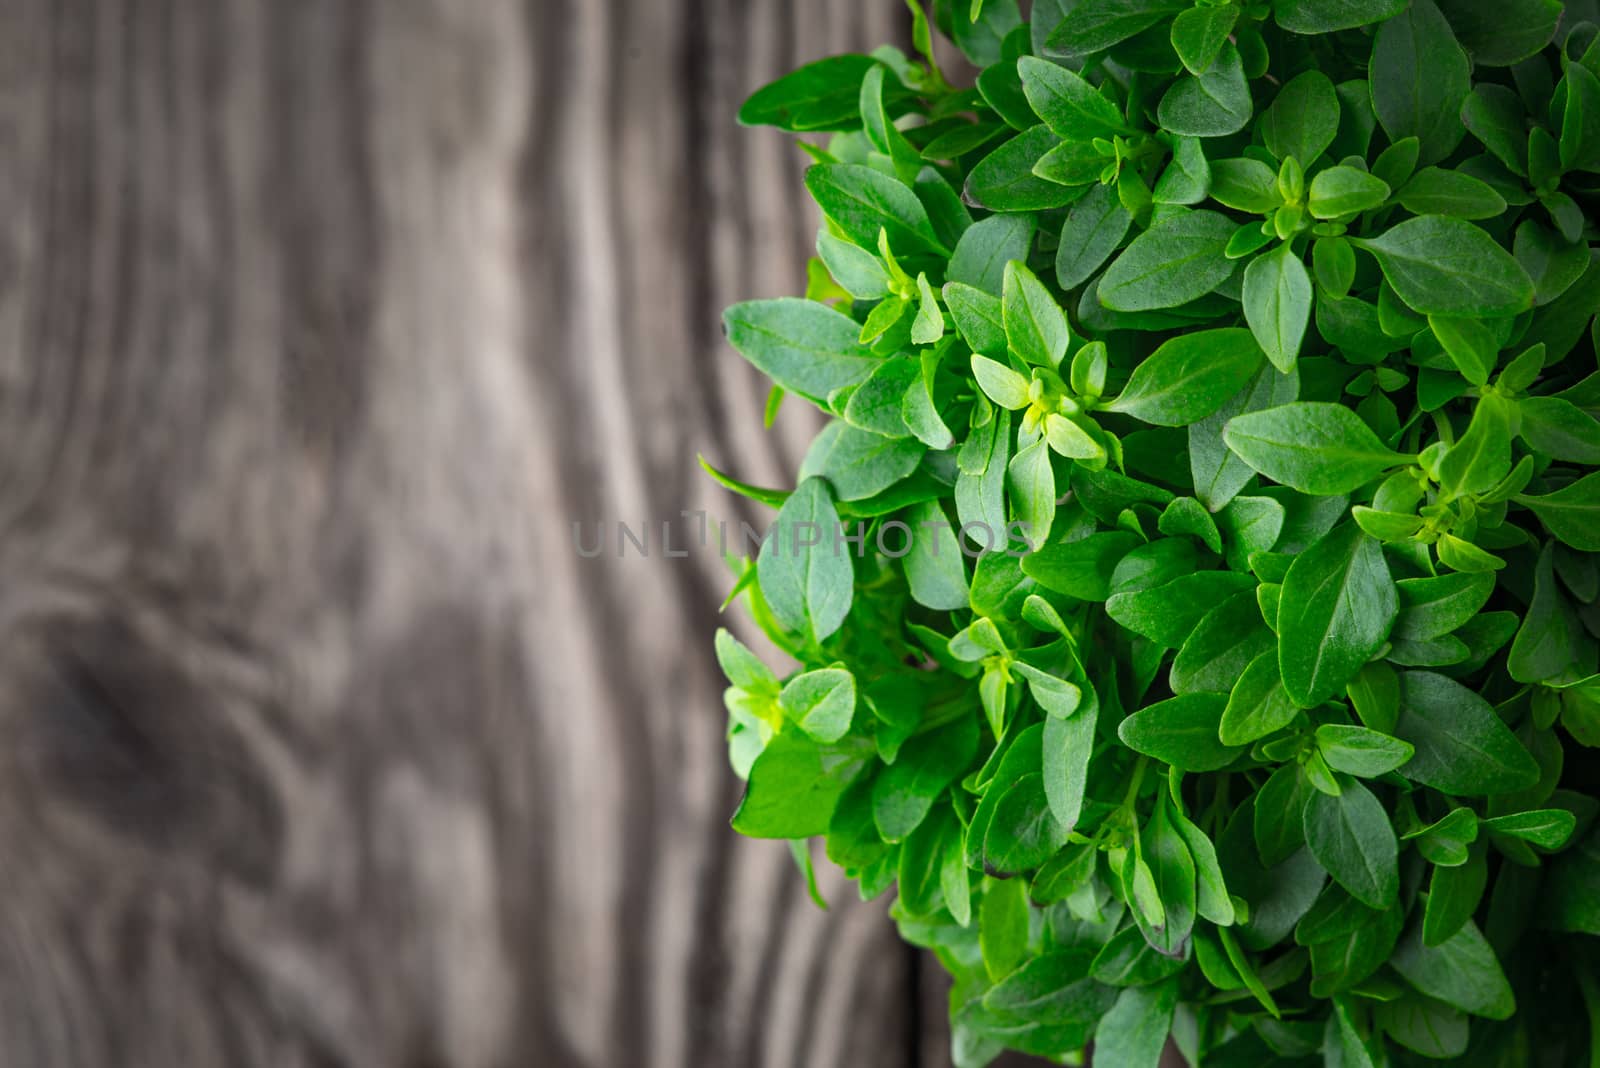 Basil leaves on a wooden background blurred right horizontal